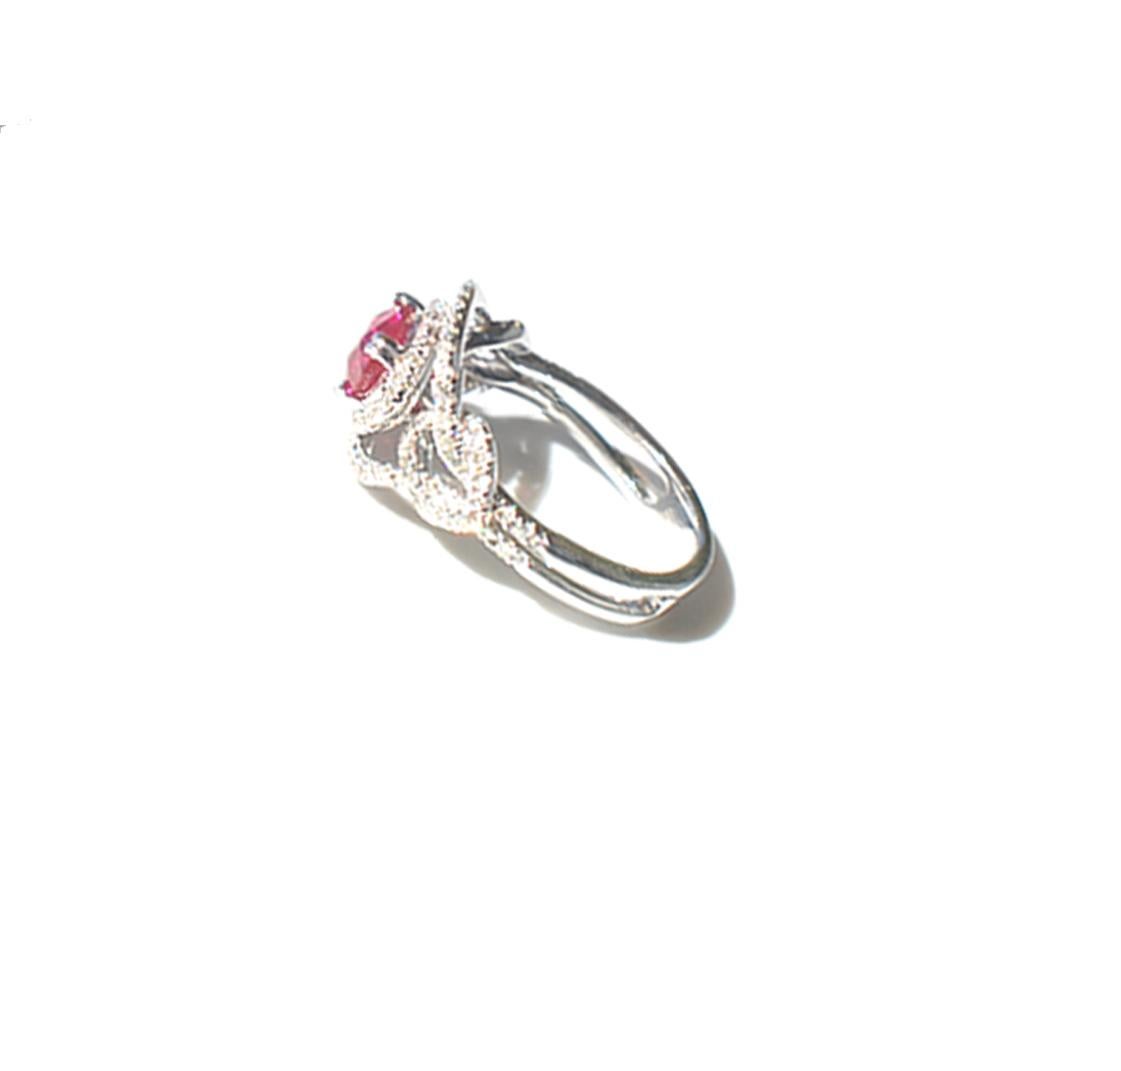 Vivid Red Ruby Diamond Solitaire Ring 2.08 Carat
Gorgeous ruby ring, of vivid red natural color. The ring setting is a halo style measuring .75 wide x .50 inches tall and is set with pave diamonds. Head of ring is 11.60 x 11.40 mm
Ruby is 1.42